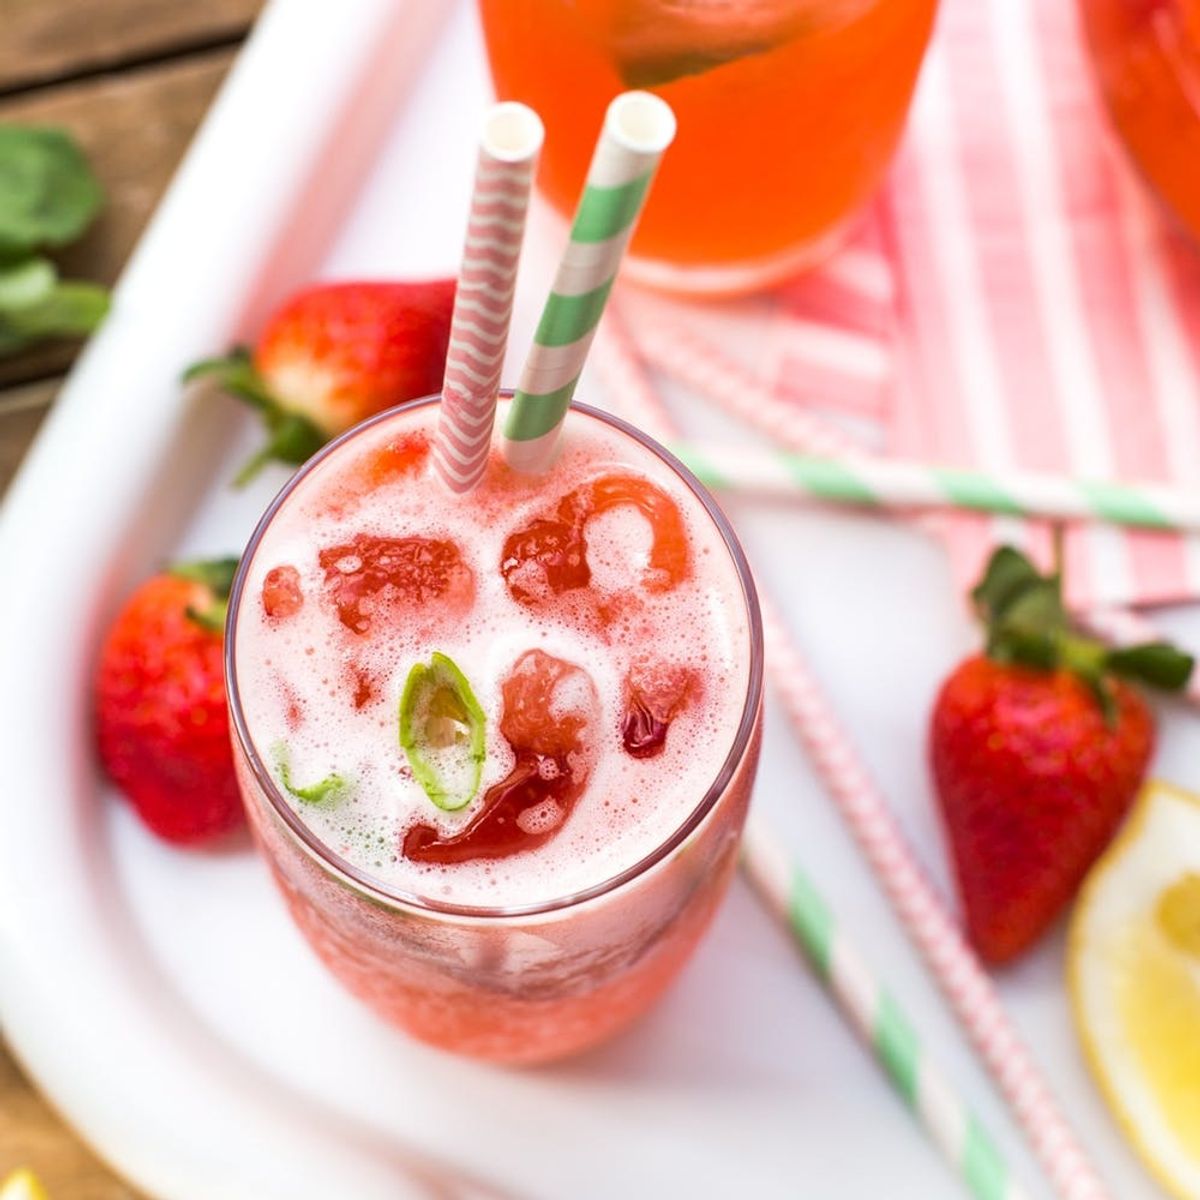 Friends Round? Sun Shining? You’ll Need This Spiked Strawberry Basil Lemonade Recipe!